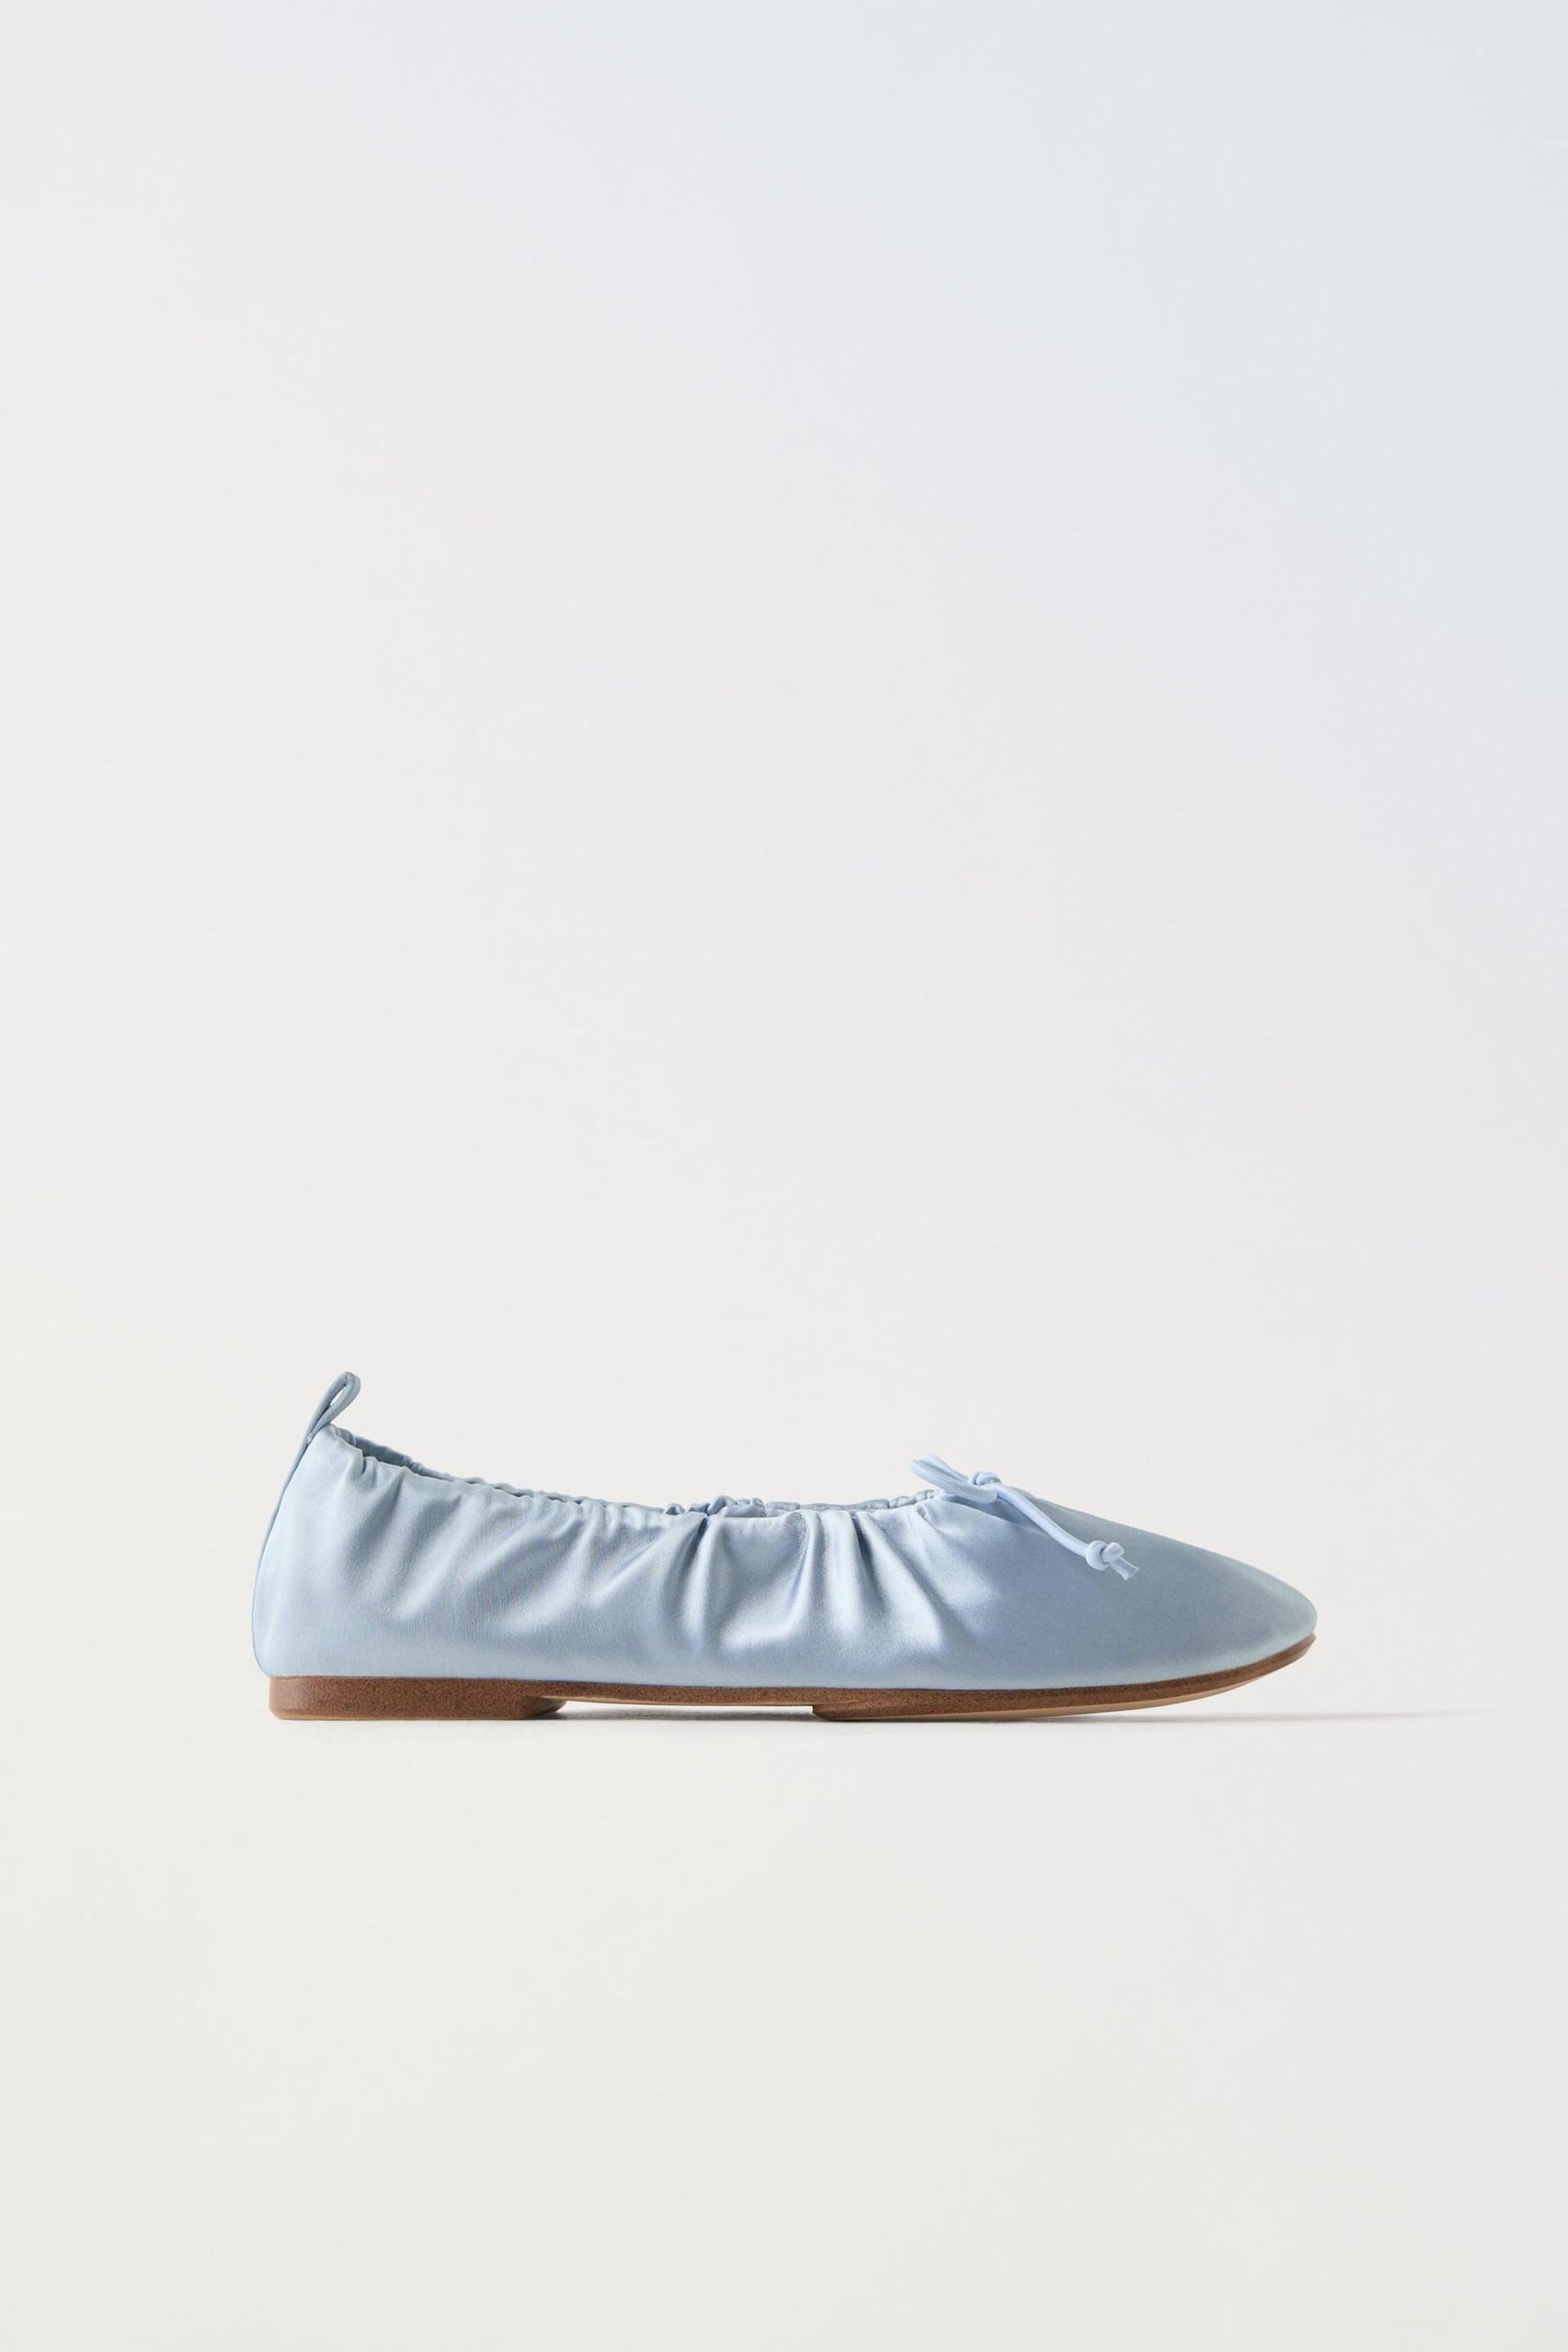 RUCHED BOW TRIM BALLET FLATS by ZARA